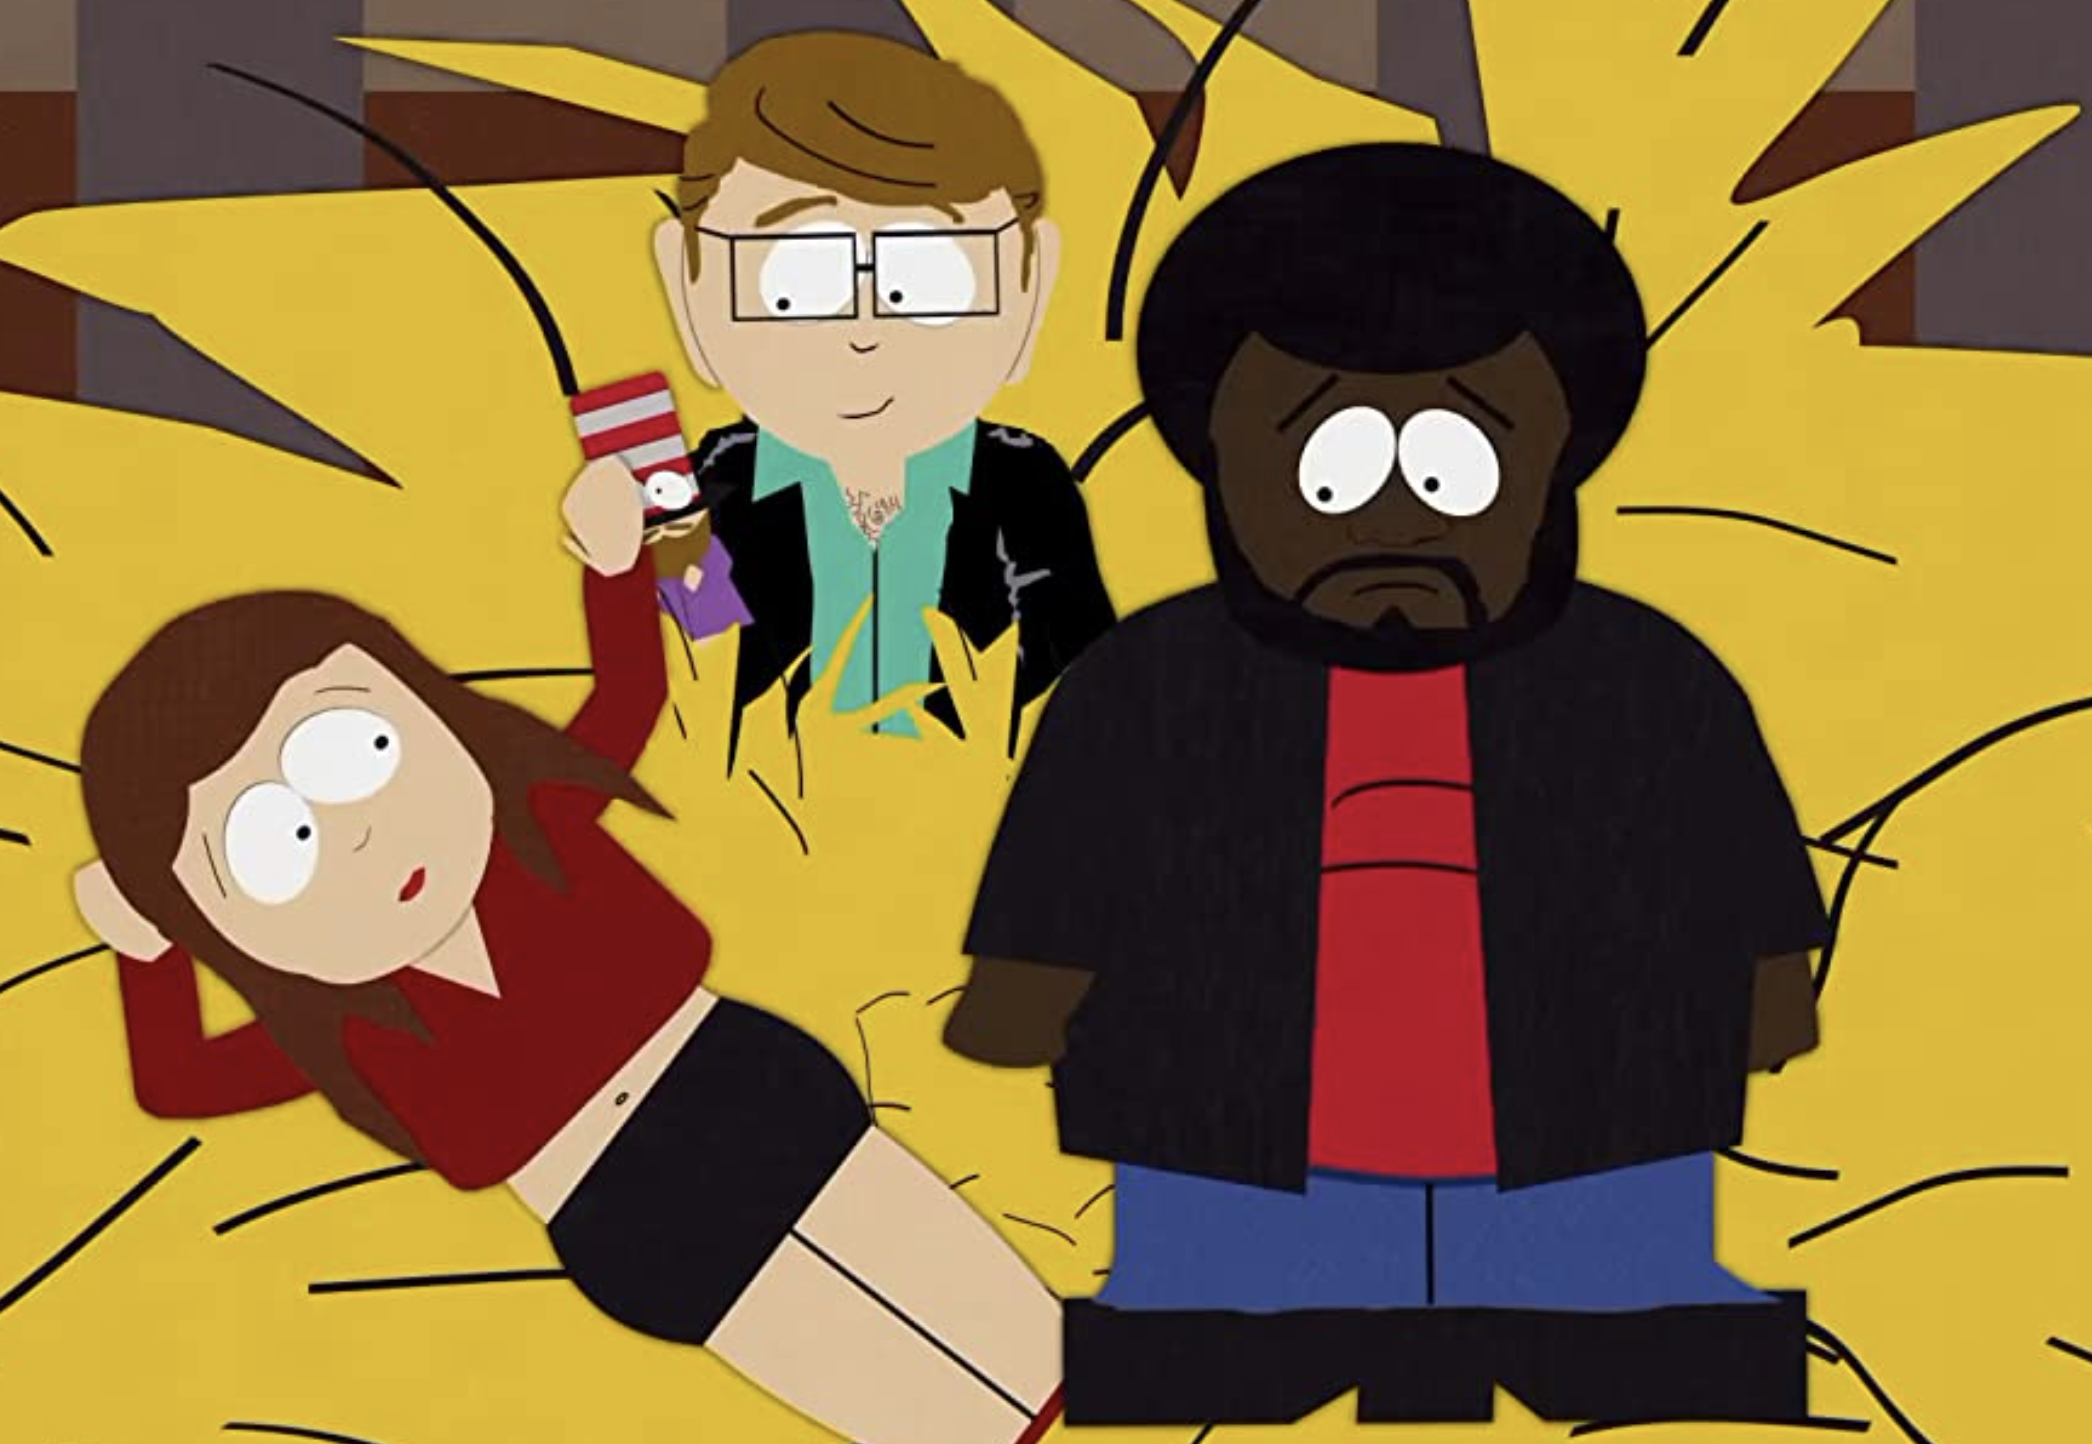 Goin' Down to South Park Guide S 1 E 13 'Cartman's Mom Is A Dirty Slut'